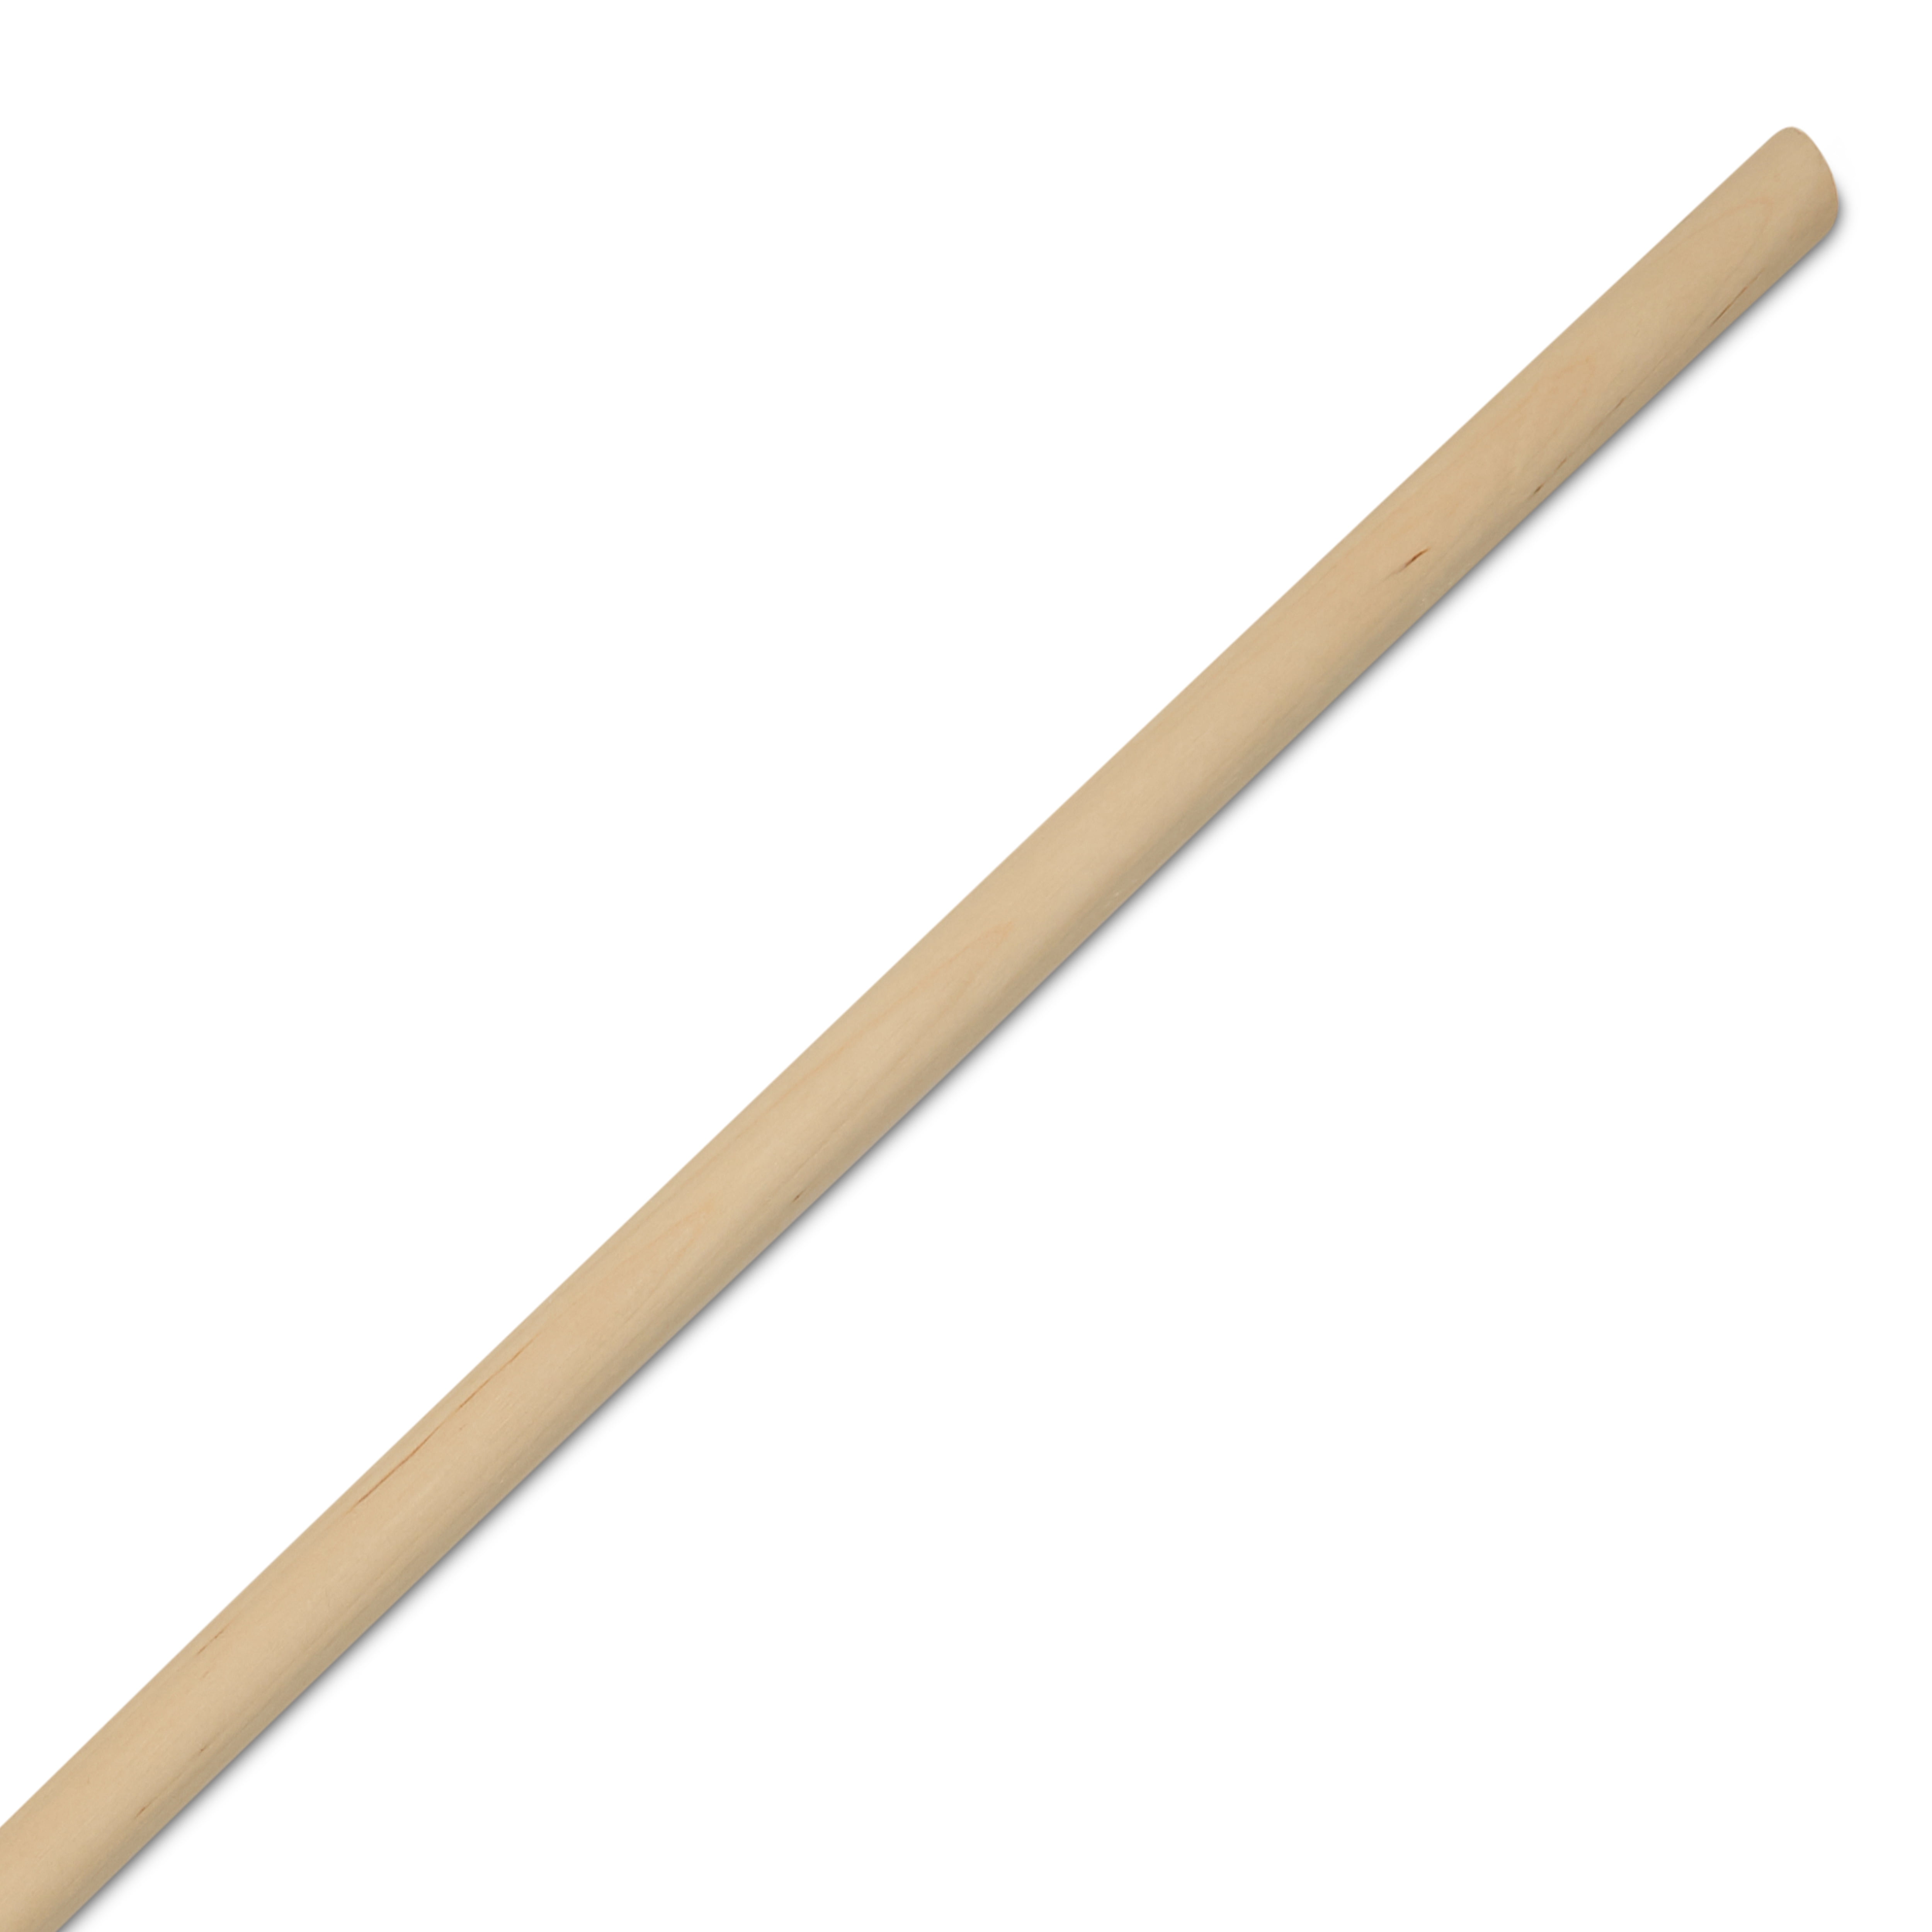 Dowel Rods Wood Sticks Wooden Dowel Rods - 1/2 x 48 inch Unfinished Hardwood Sticks - for Crafts and DIYers - 250 Pieces by Woodpeckers